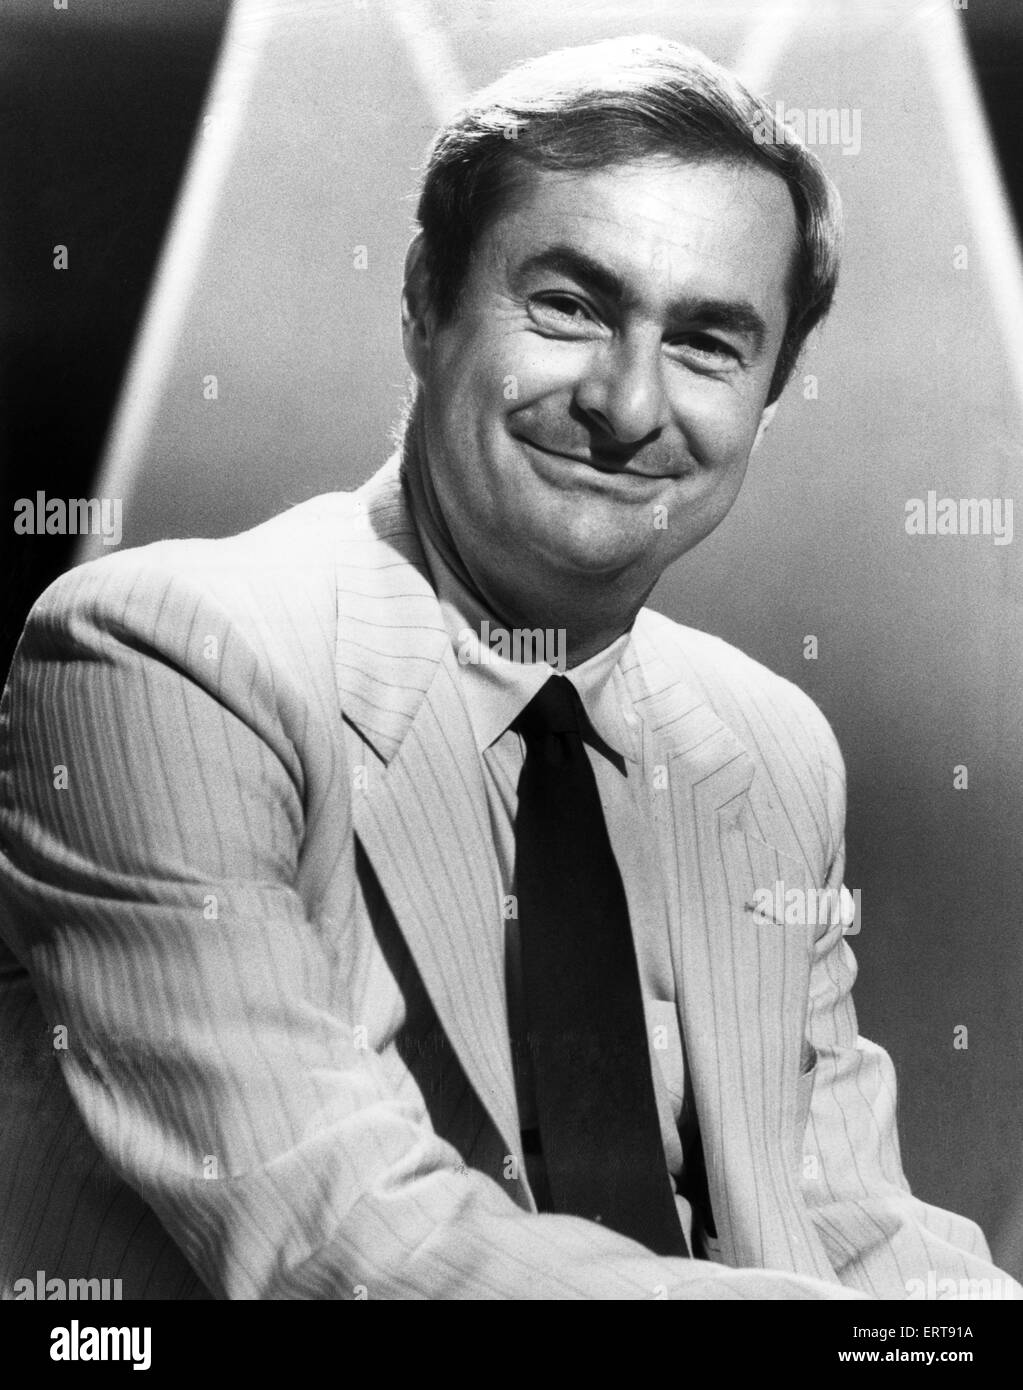 Paul Gambaccini, radio and television presenter and author. 16th July 1985. Stock Photo